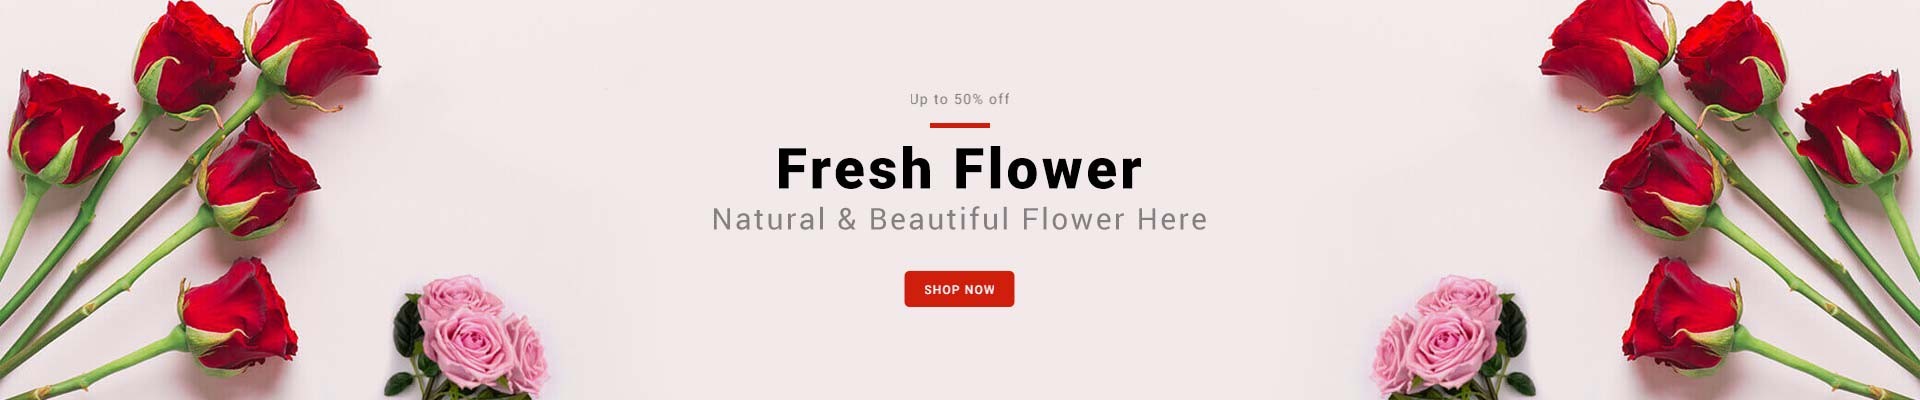 Send and Deliver fresh flowers in Uganda